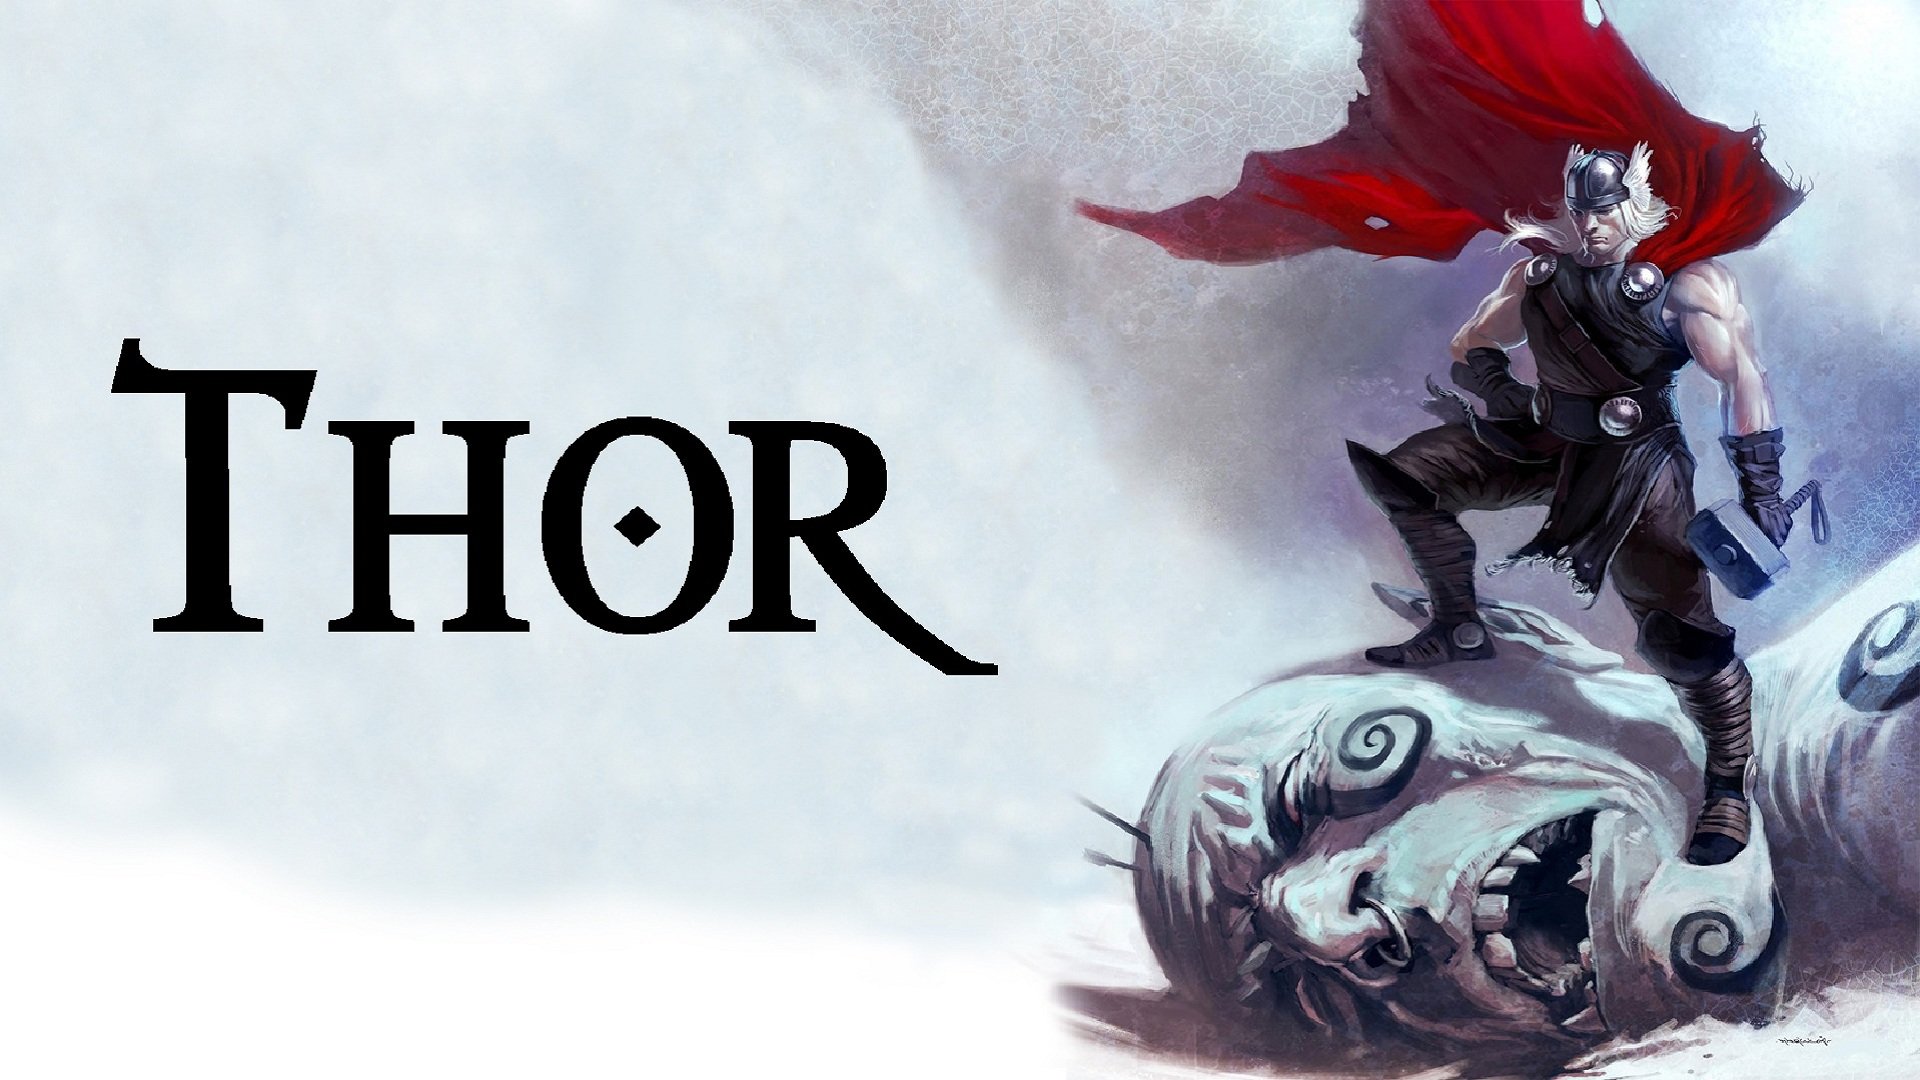 Awesome Thor comics free wallpaper ID:158559 for hd 1920x1080 desktop